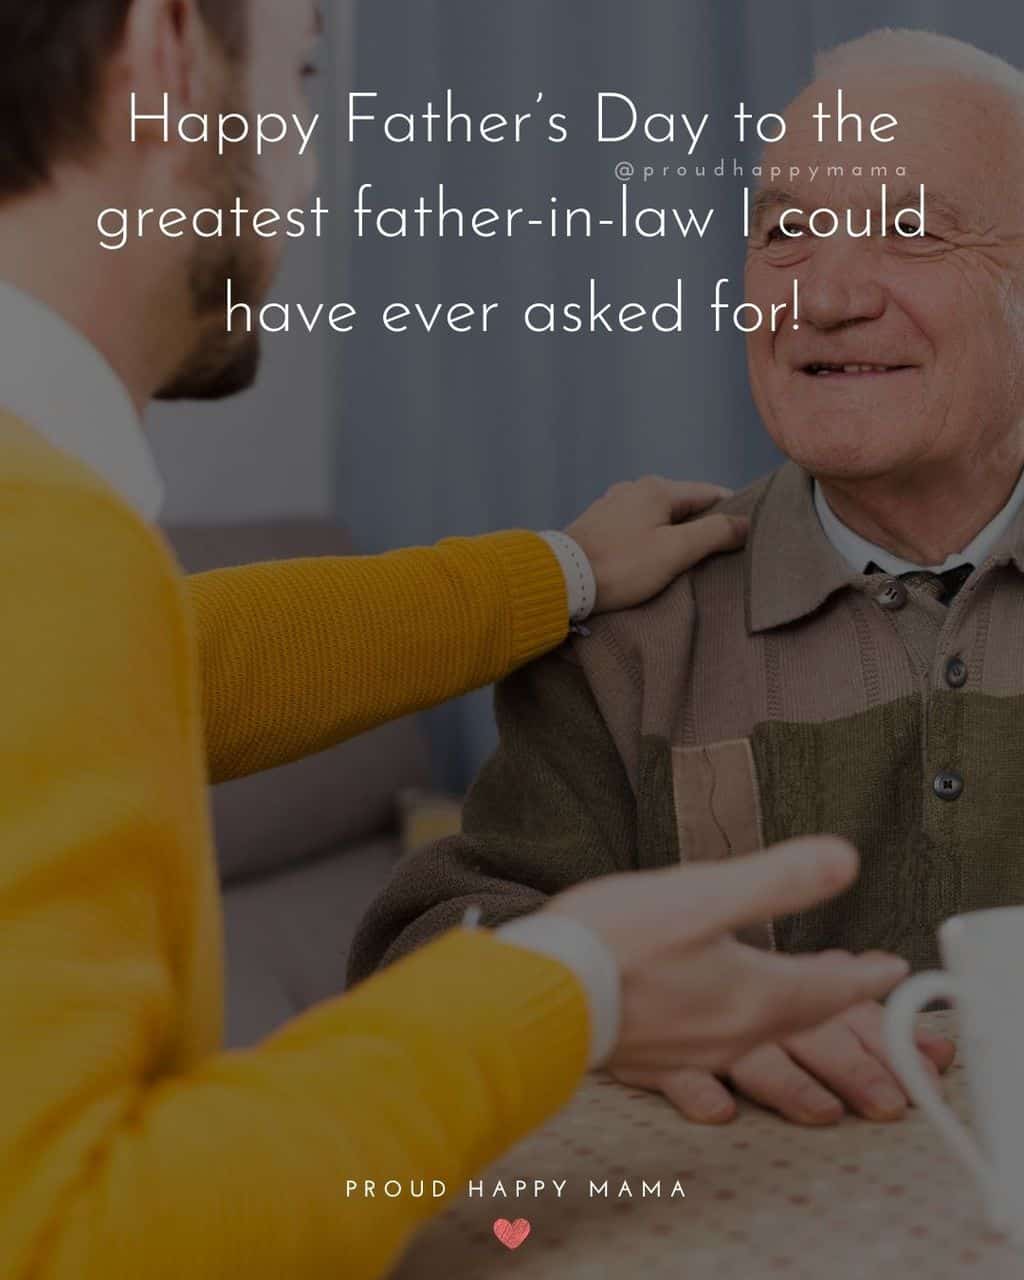 Happy Fathers Day Quotes For Father In Law - Happy Father’s Day to the greatest father in law I could have ever asked for!’